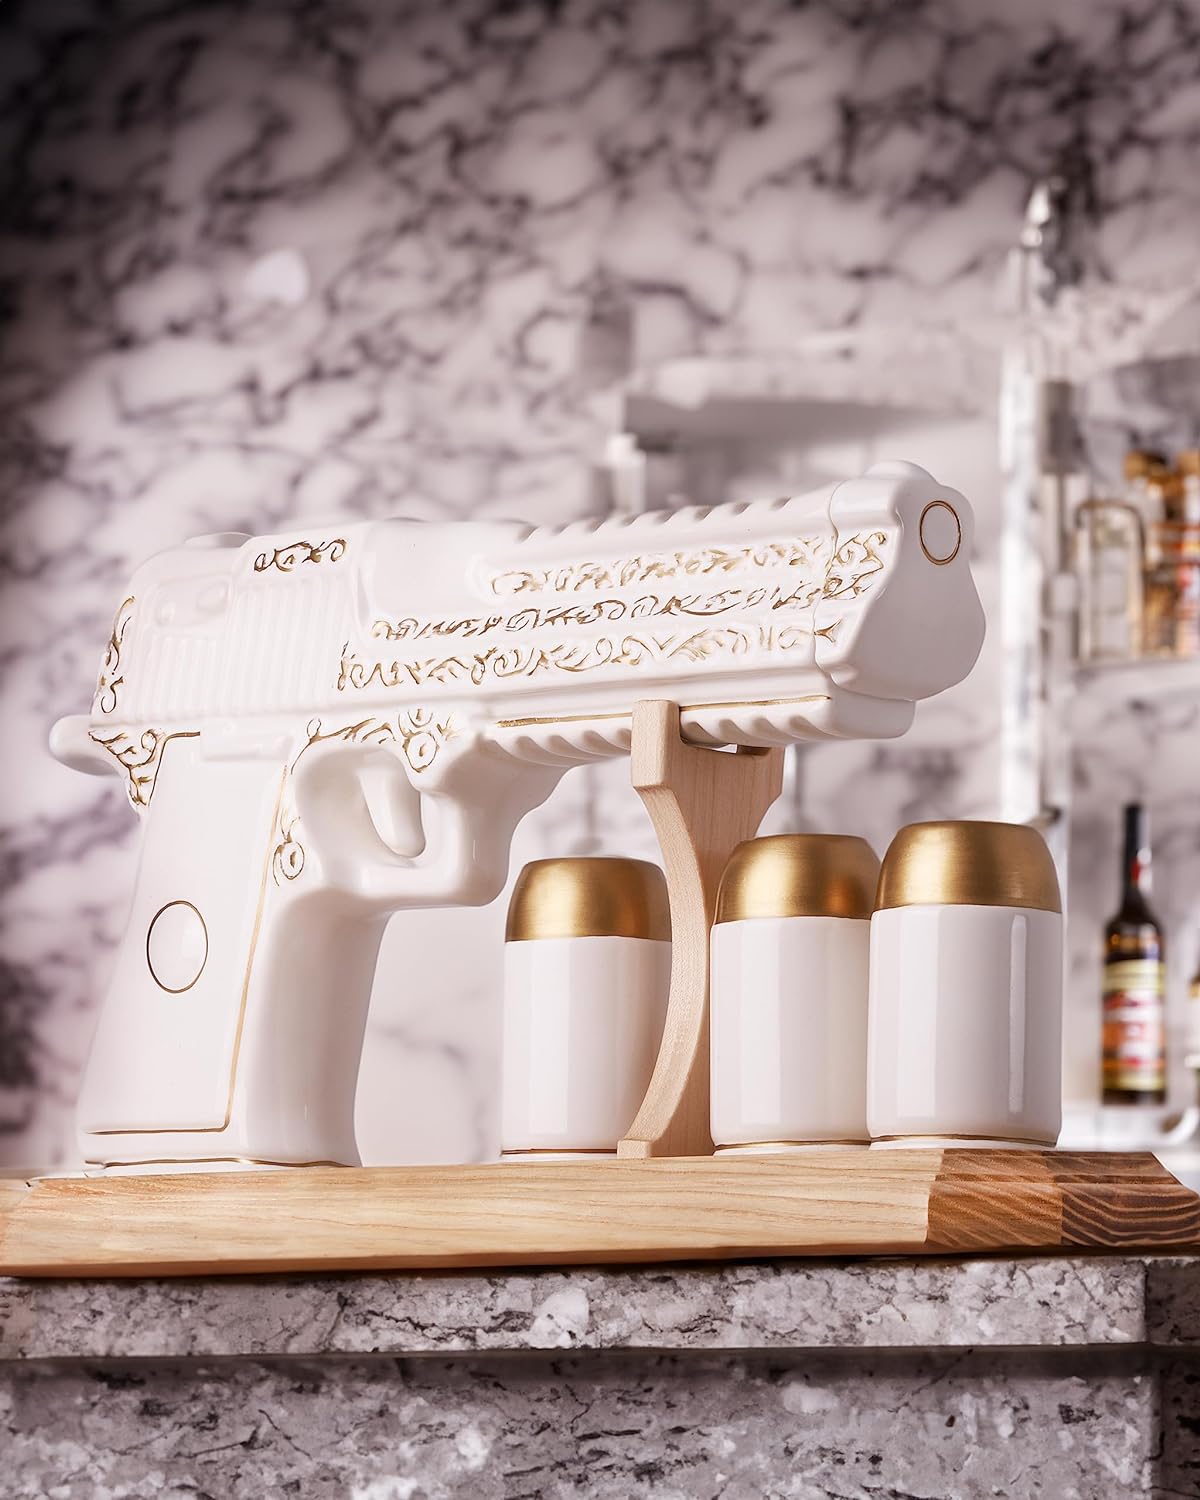 Product Of The Week: Pistol Shaped Decanter Set